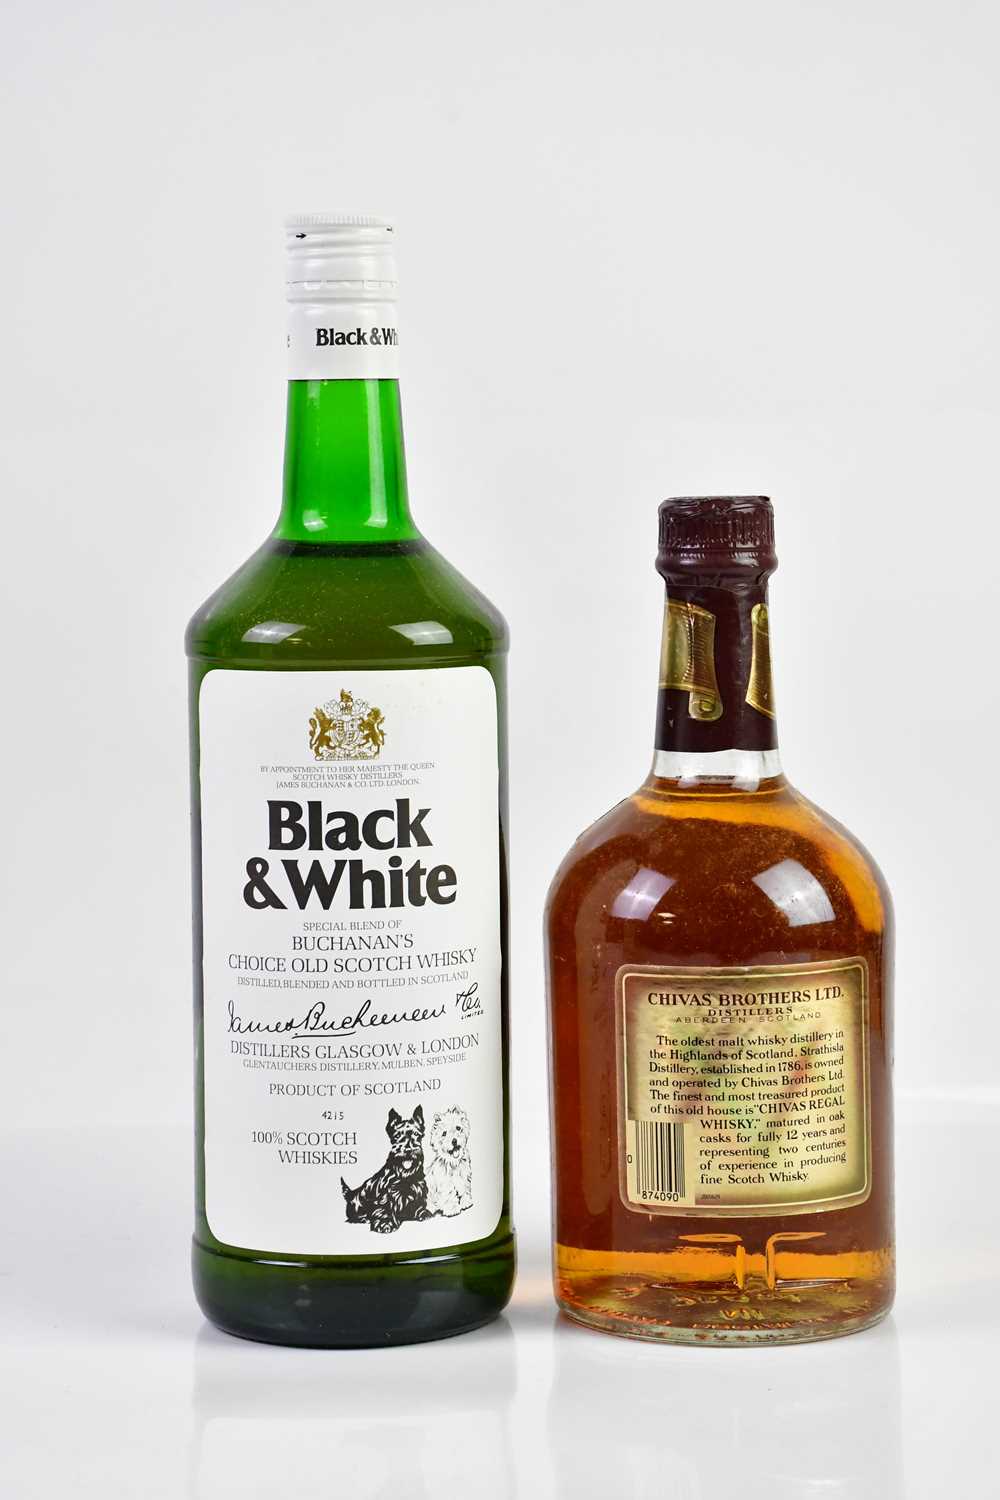 MIXED SPIRITS; a bottle of Chivas Regal 12 years old, Black & White Scotch whisky, Yates's Finest - Image 3 of 6